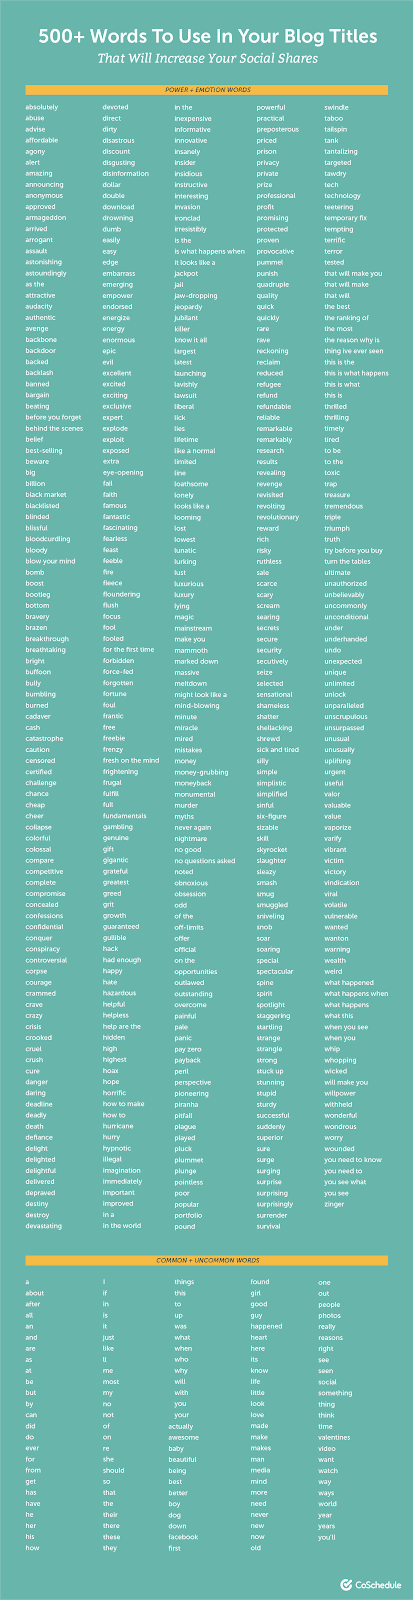 List of 500+ words to add to your headlines